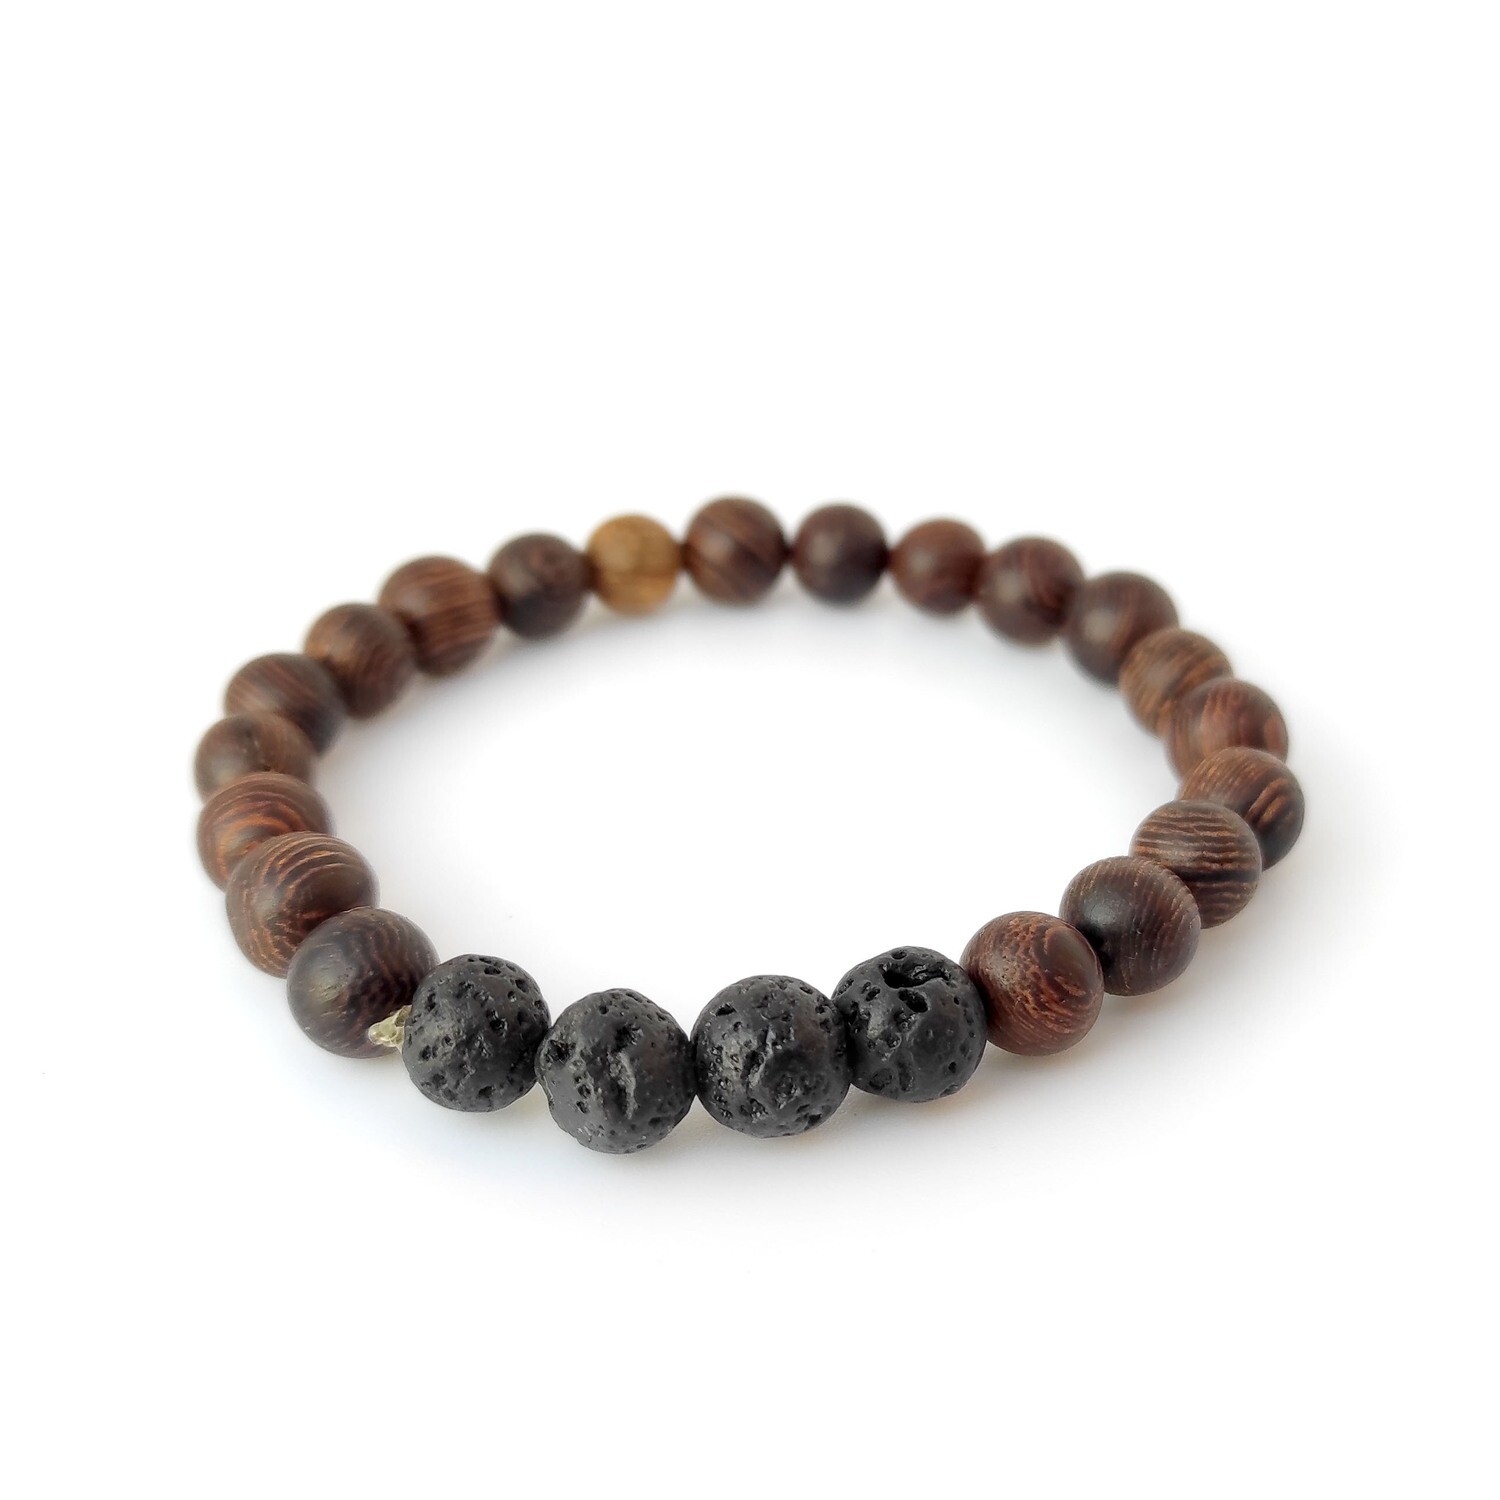 Lava Rock with brown wooden beads bracelet